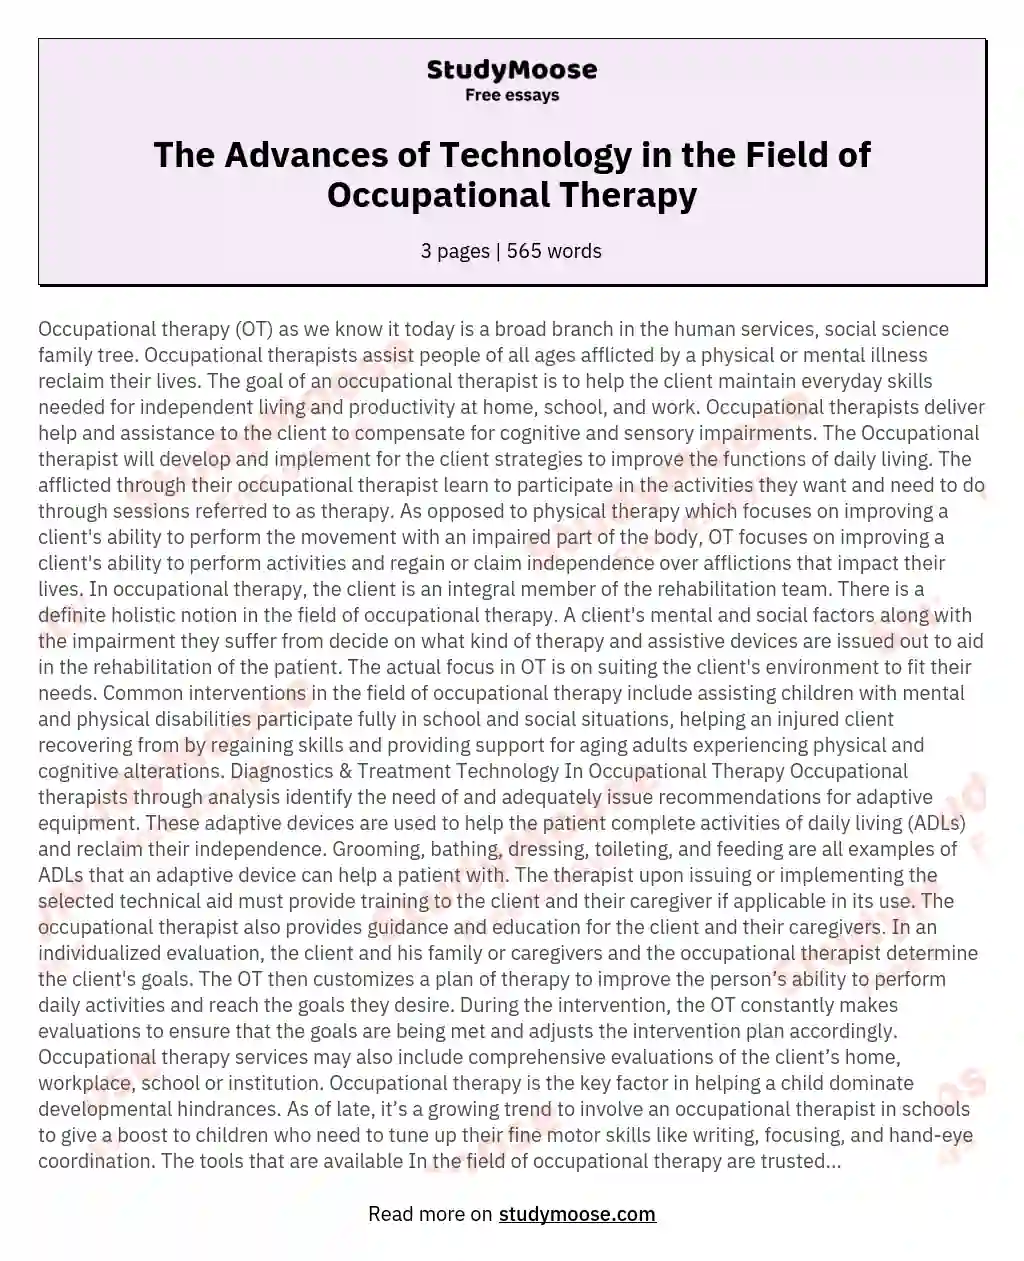 The Advances of Technology in the Field of Occupational Therapy essay